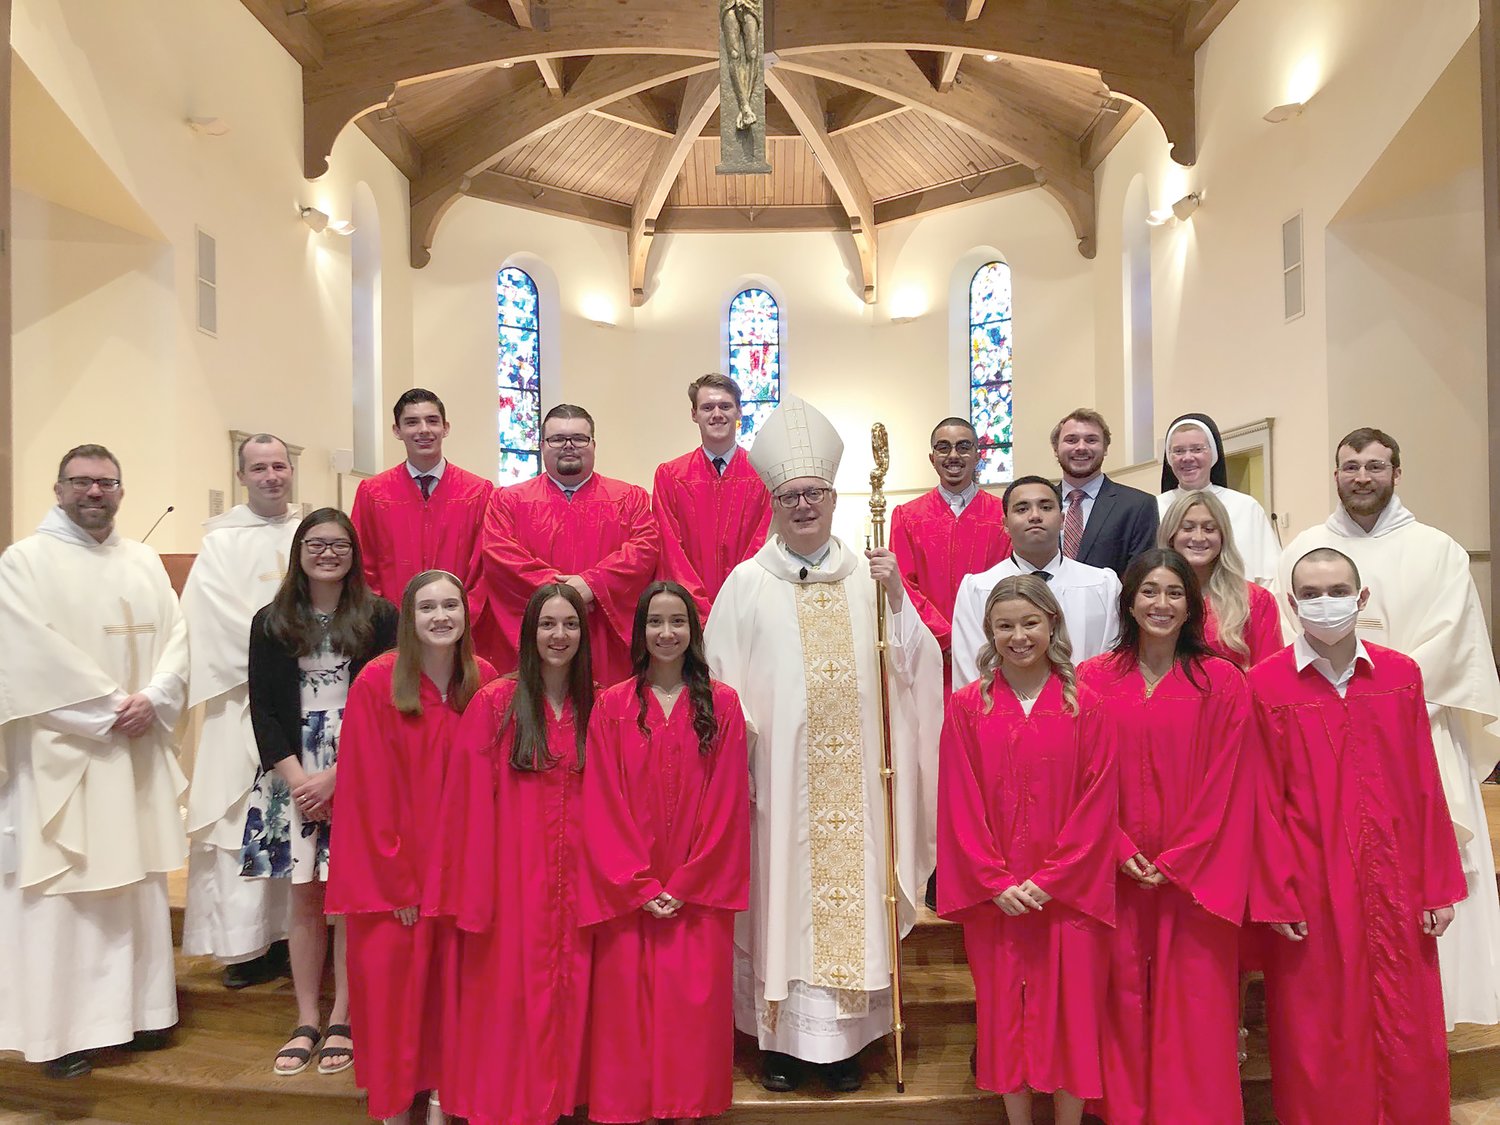 Bishop Thomas J. Tobin gathers with the students on their special day.